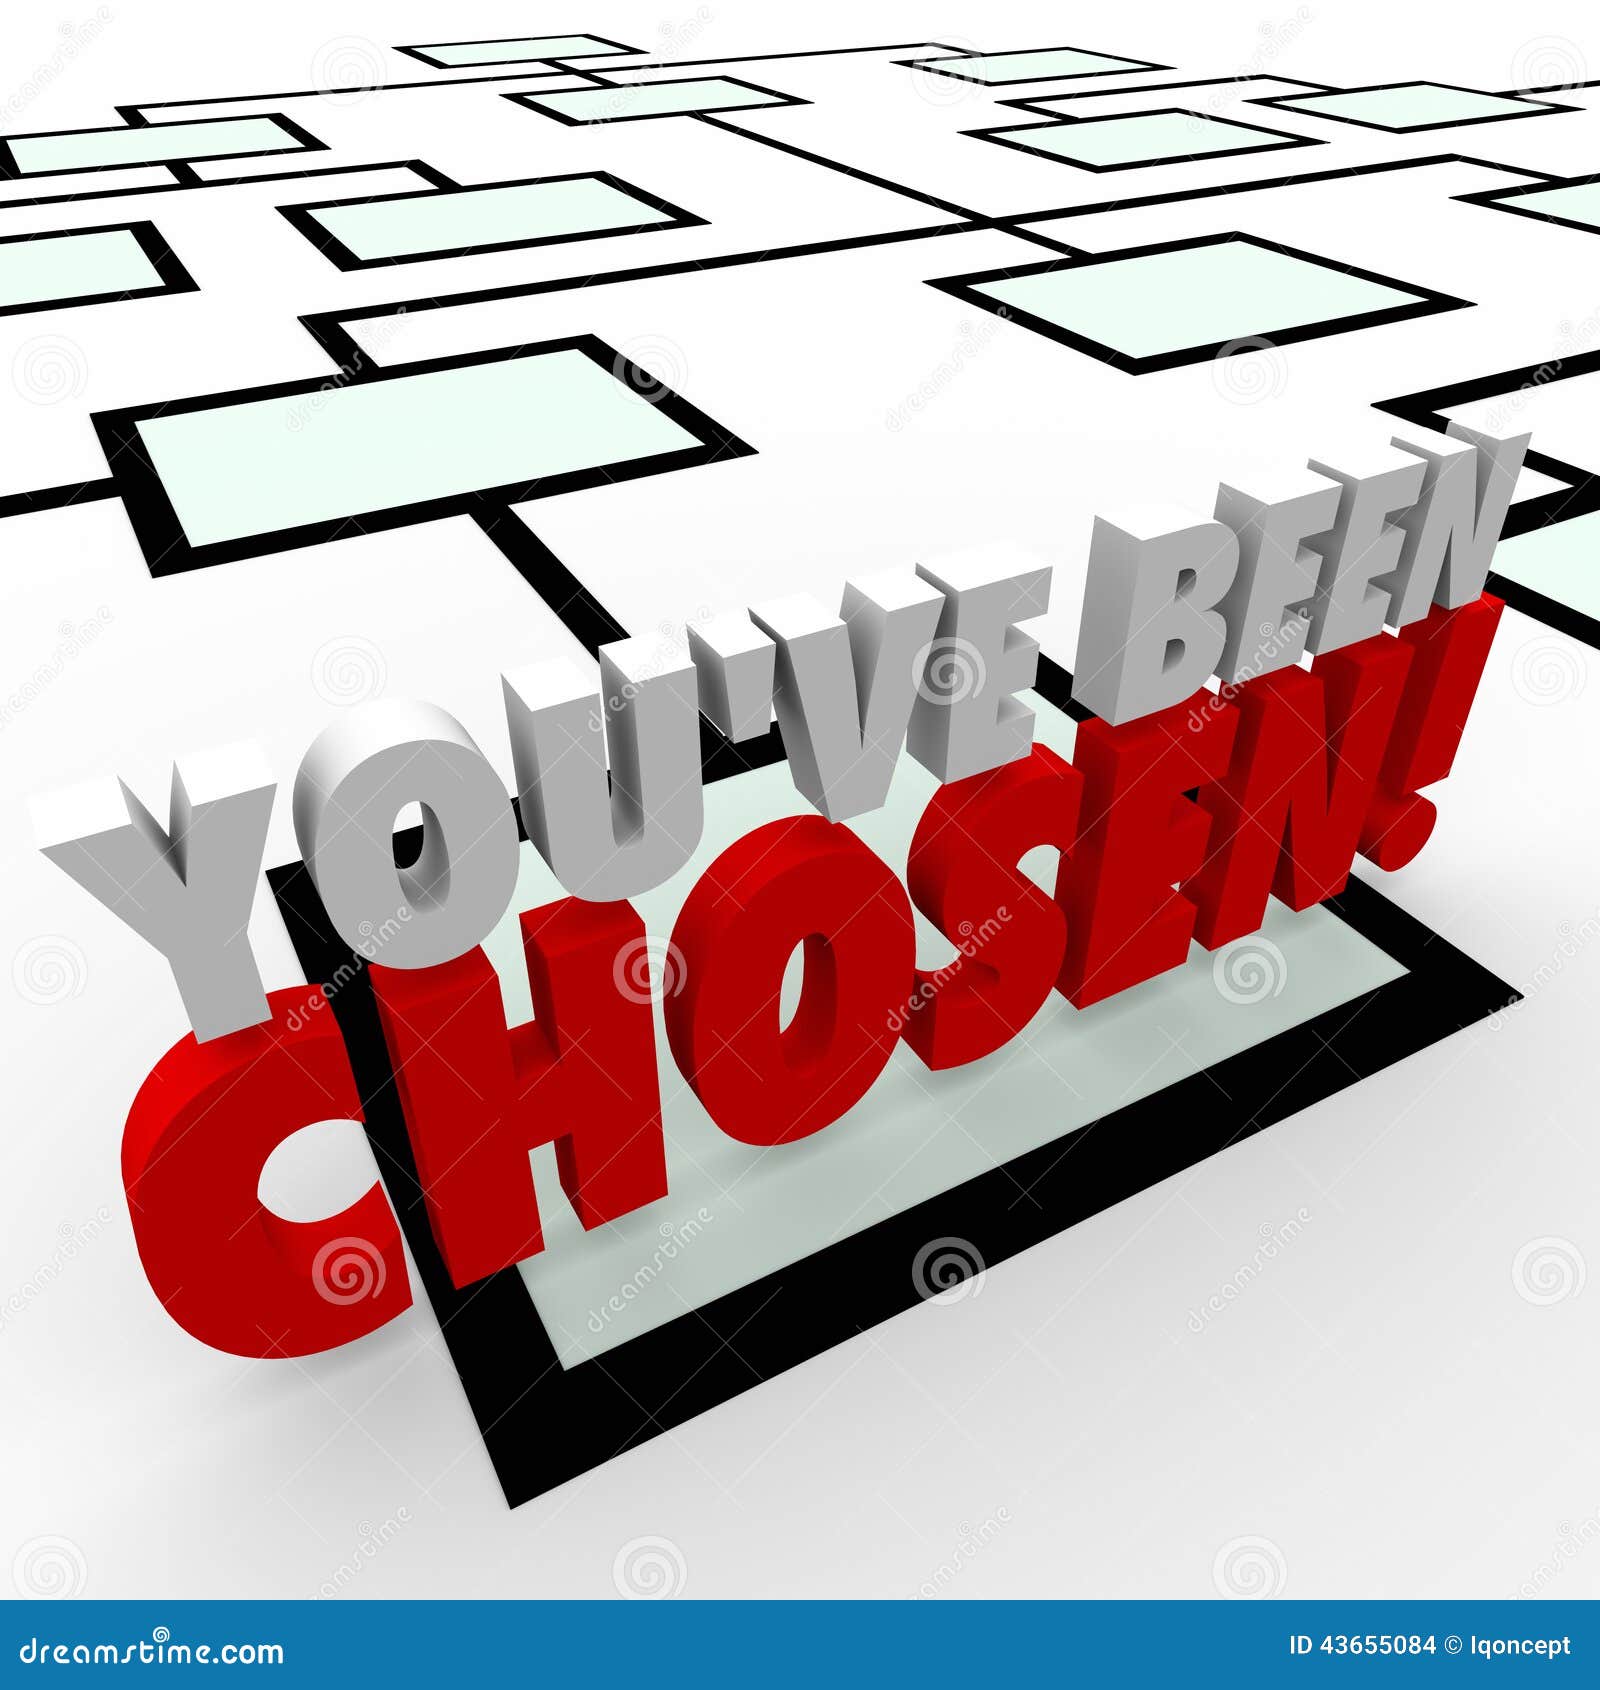 you've been chosen 3d words company organization chart promotion